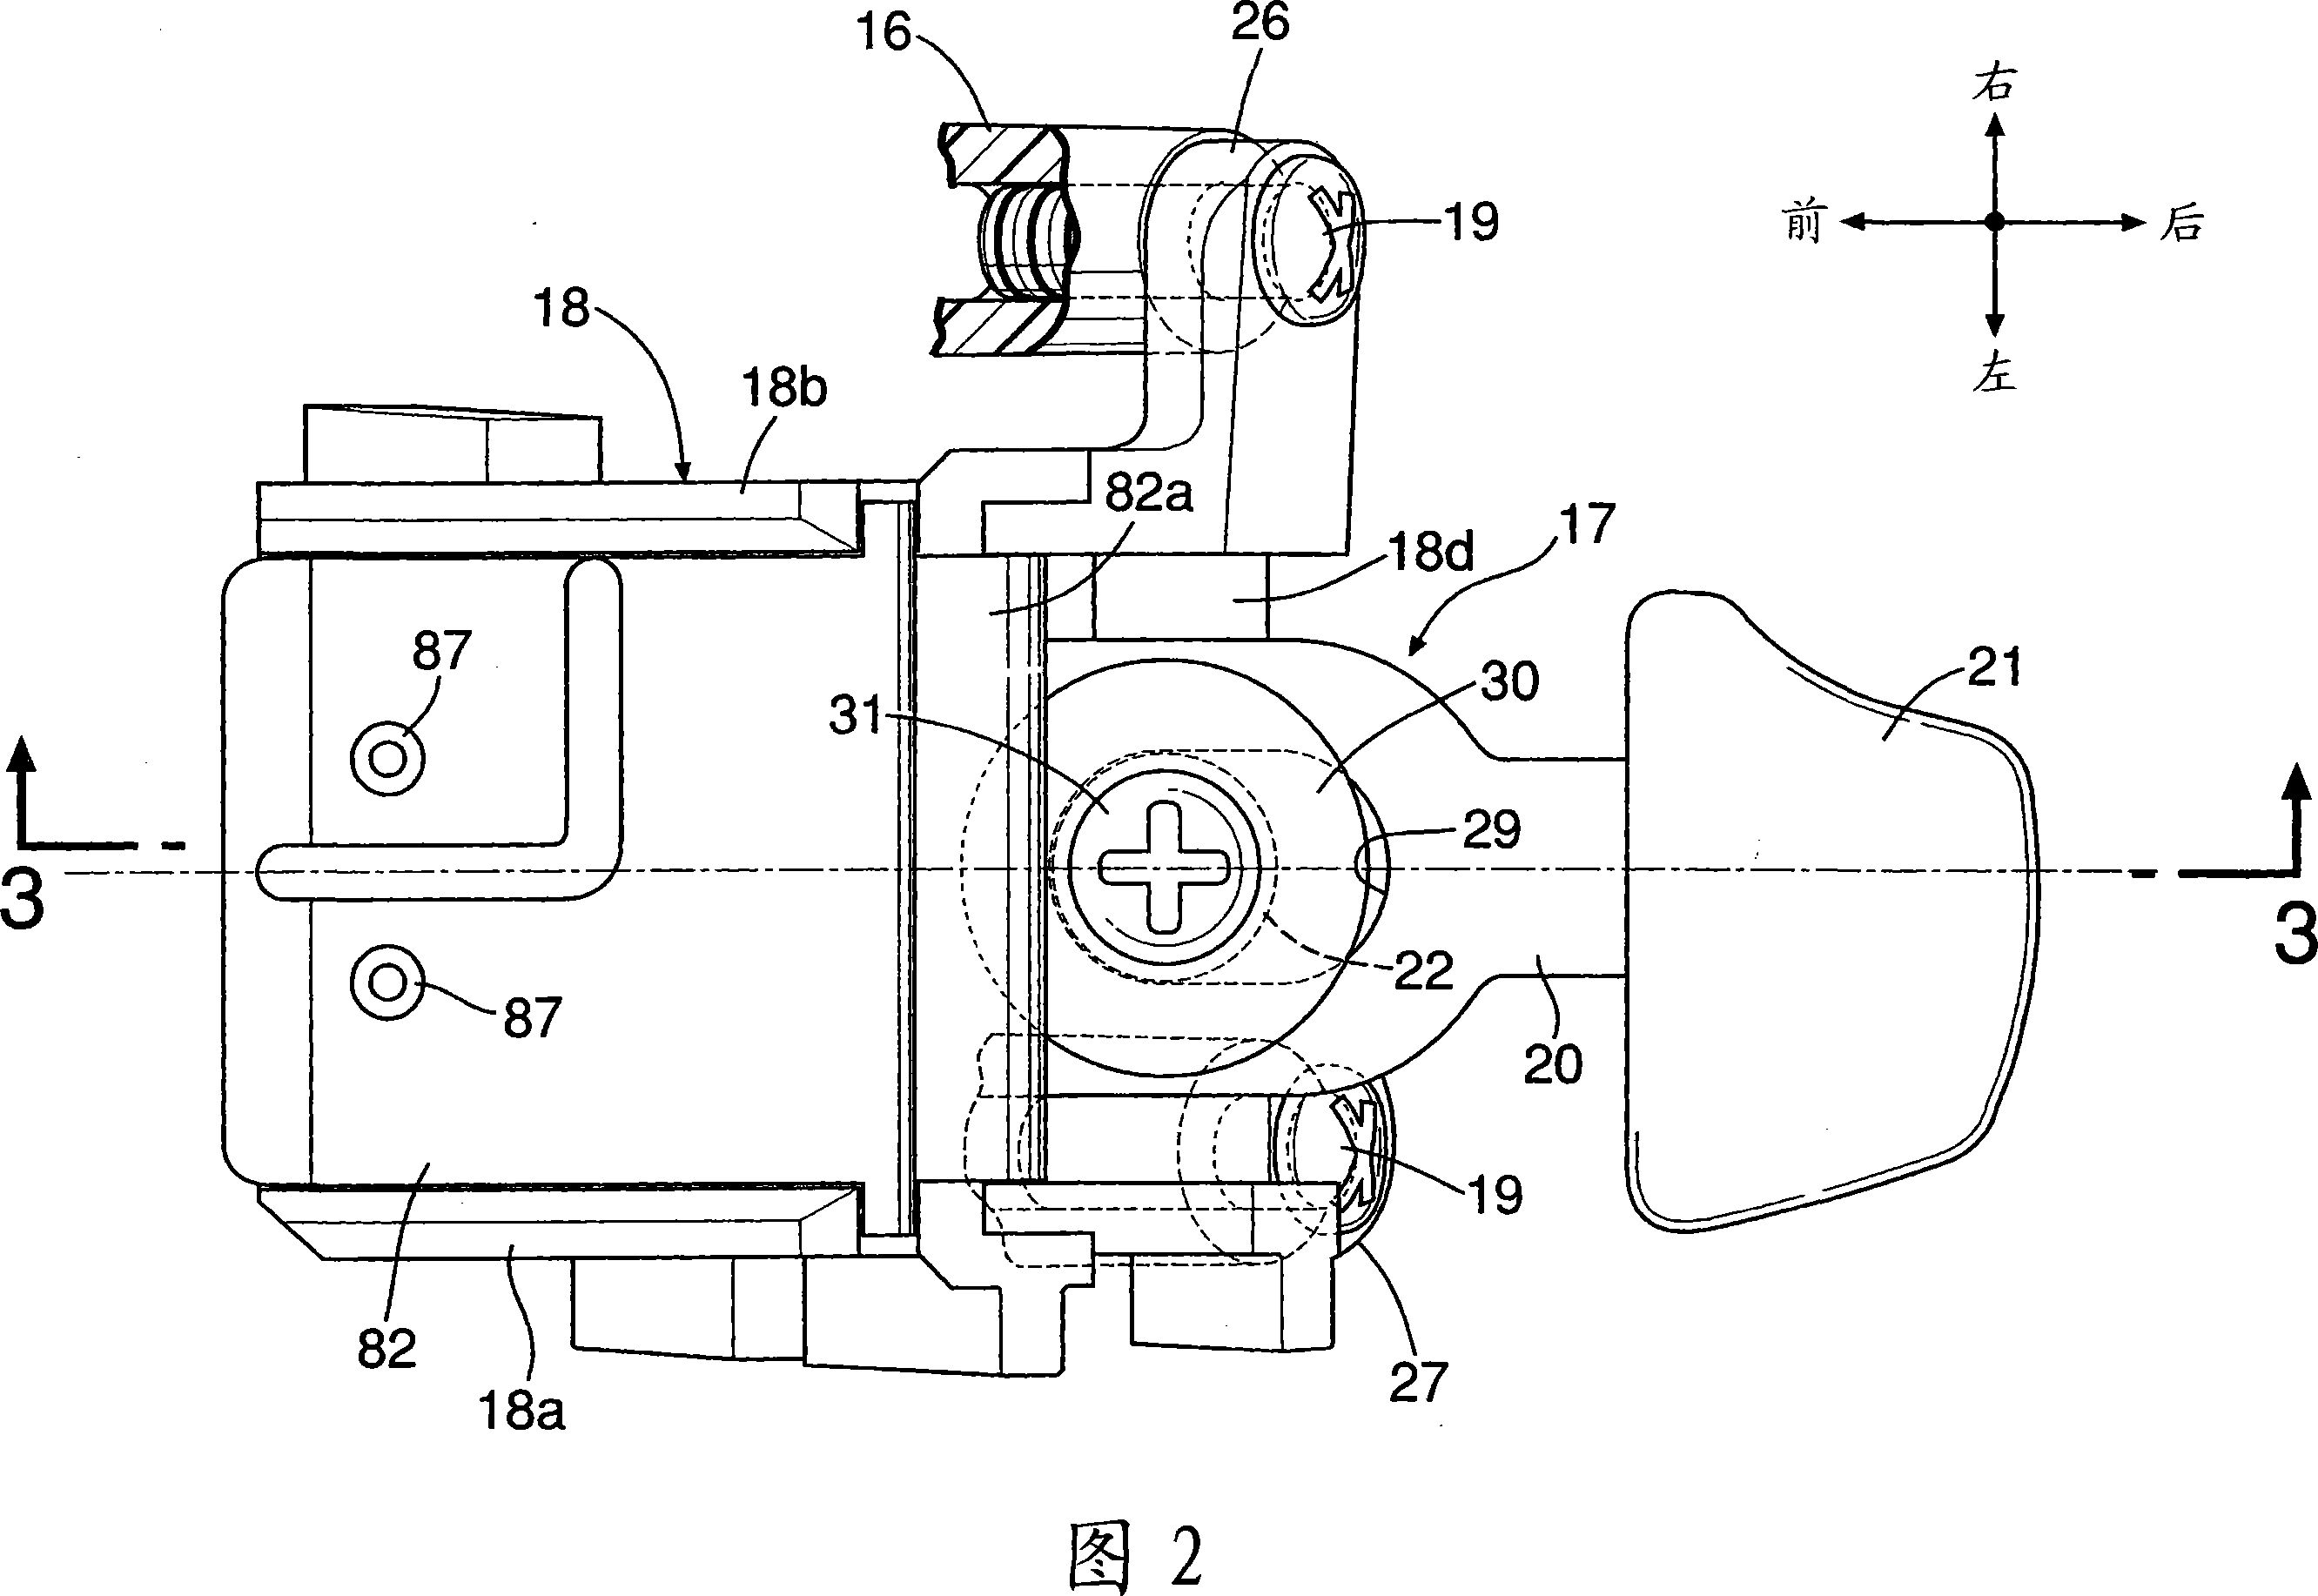 Turn signal control device for vehicle